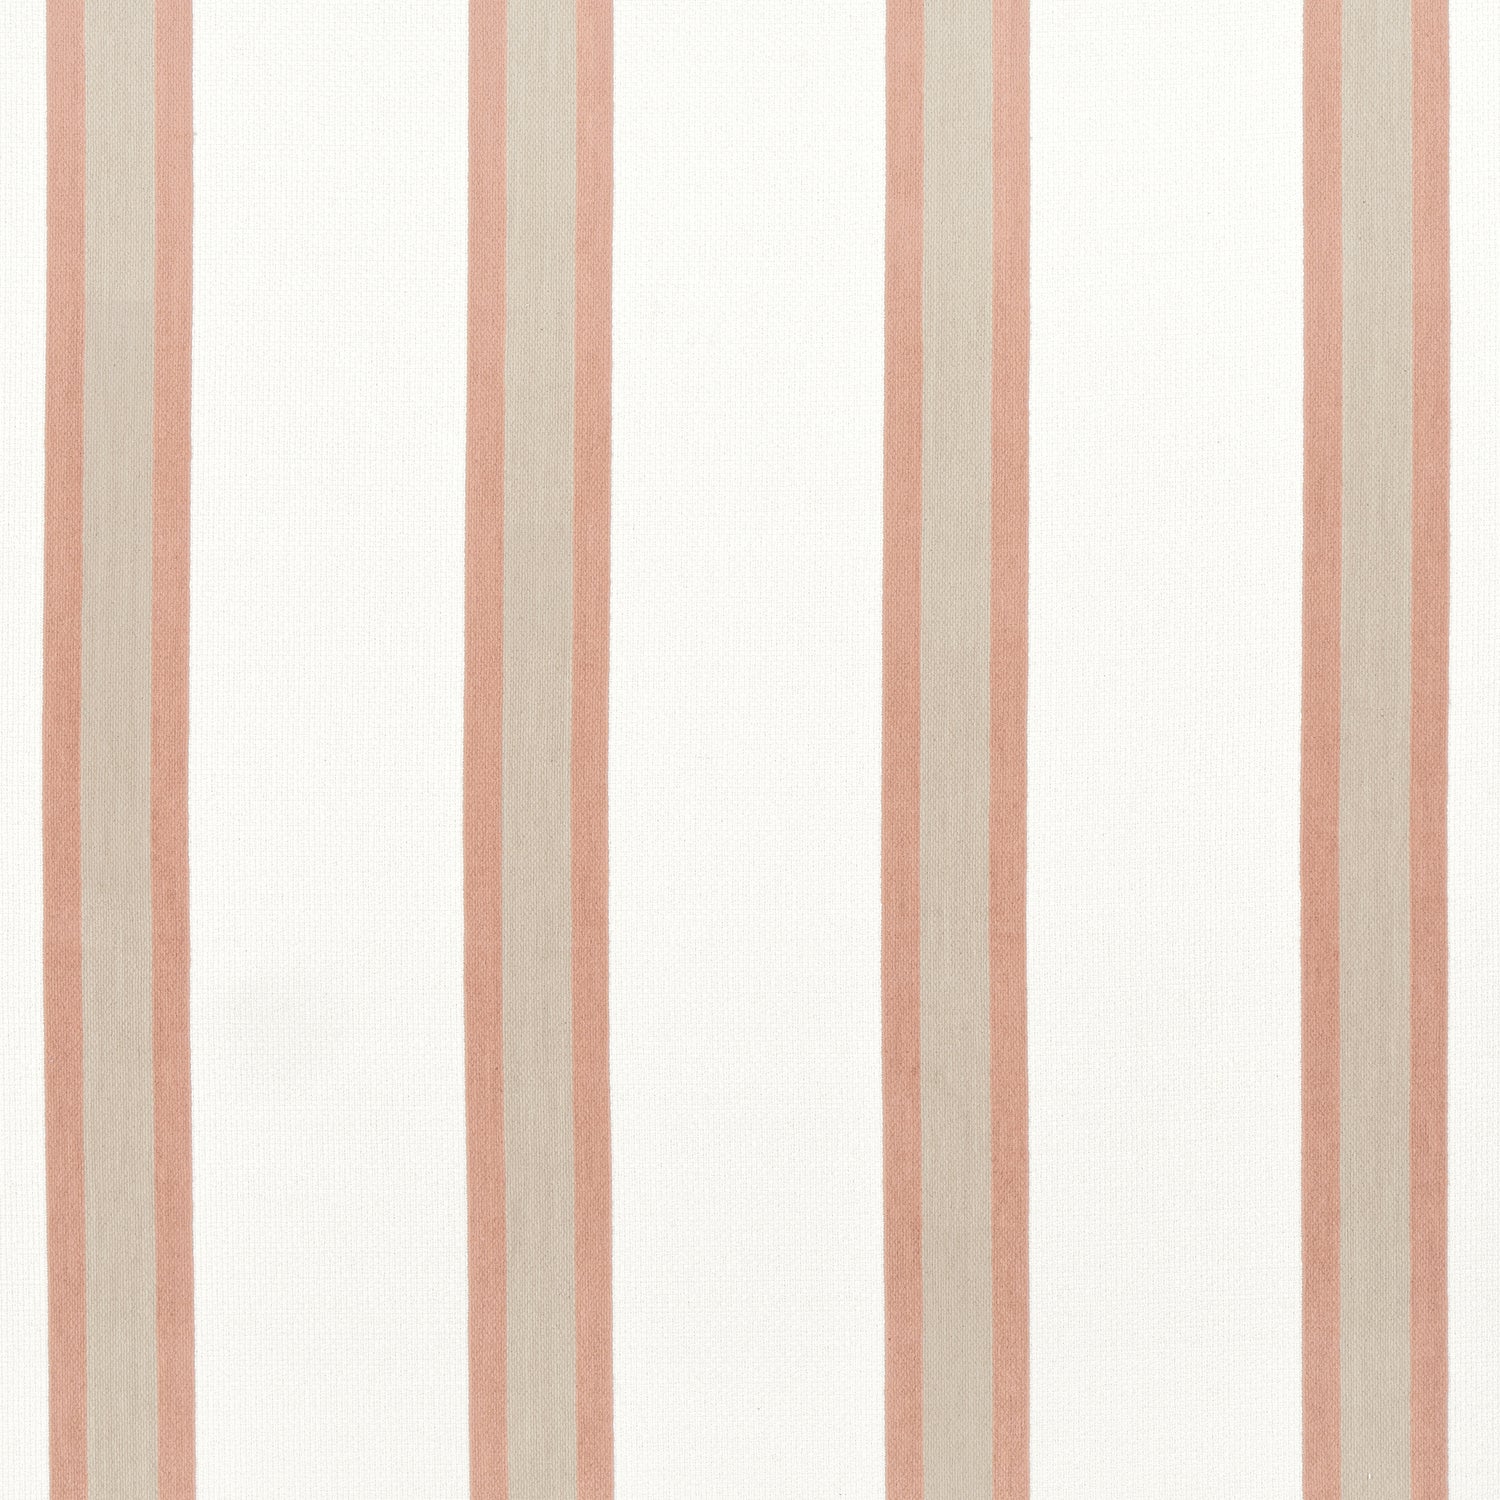 Abito Stripe fabric in clay color - pattern number W77143 - by Thibaut in the Veneto collection